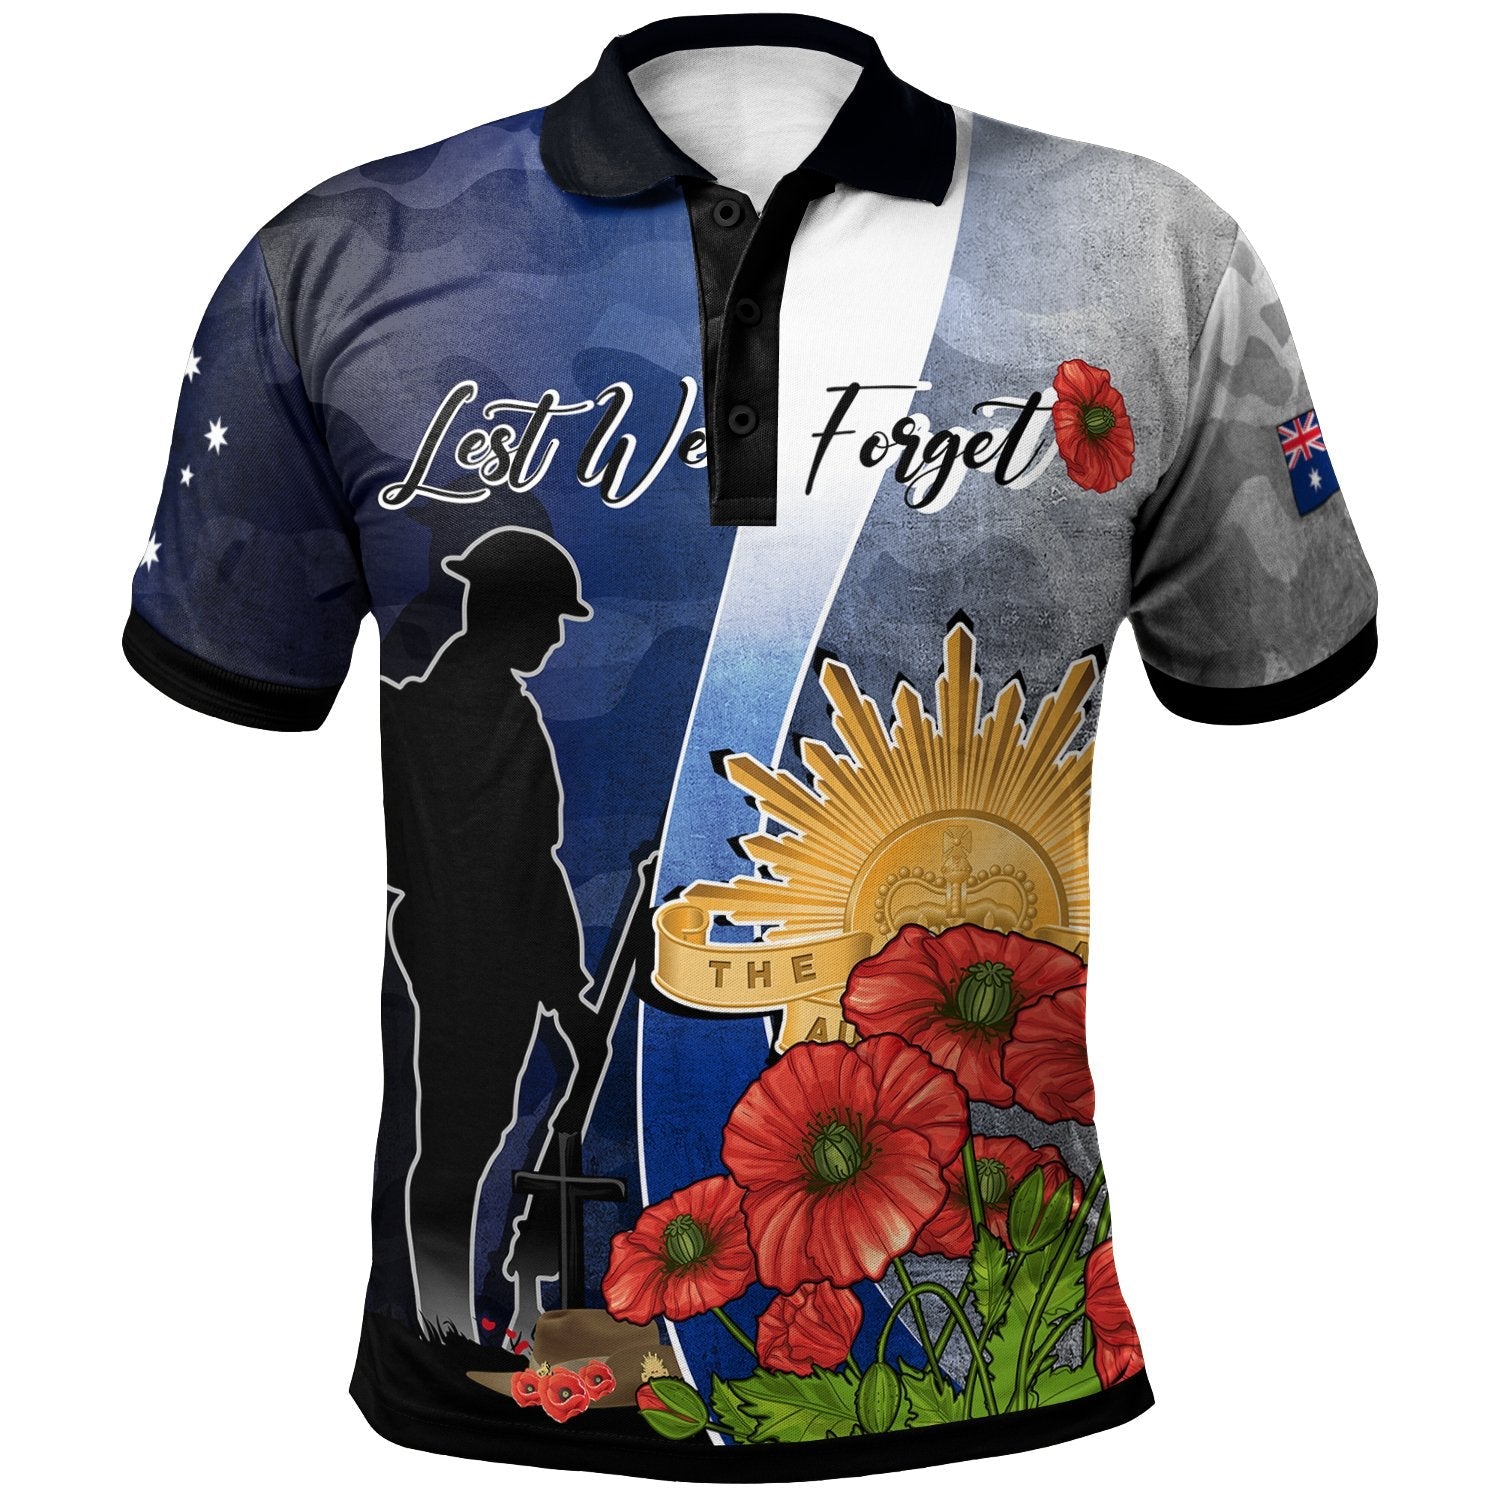 anzac-day-polo-shirt-lest-we-forget-poppy-flower